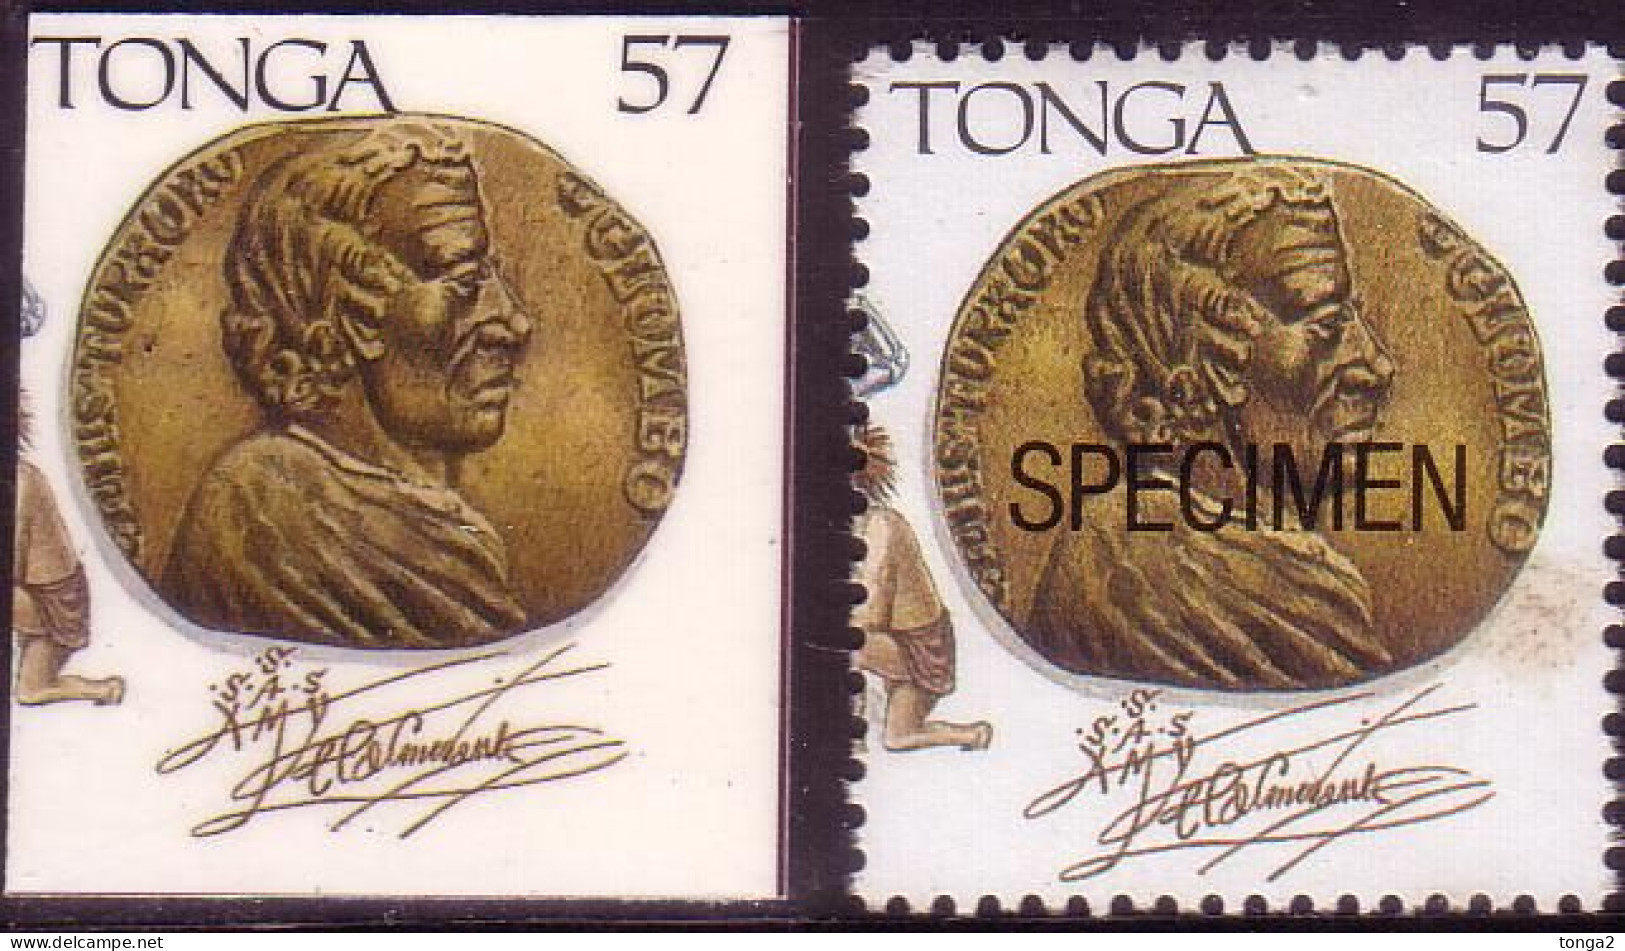 Tonga 1992 Cromalin Proof - Gold Medal Showing Columbus And His Signature - 4 Exist - Christoffel Columbus